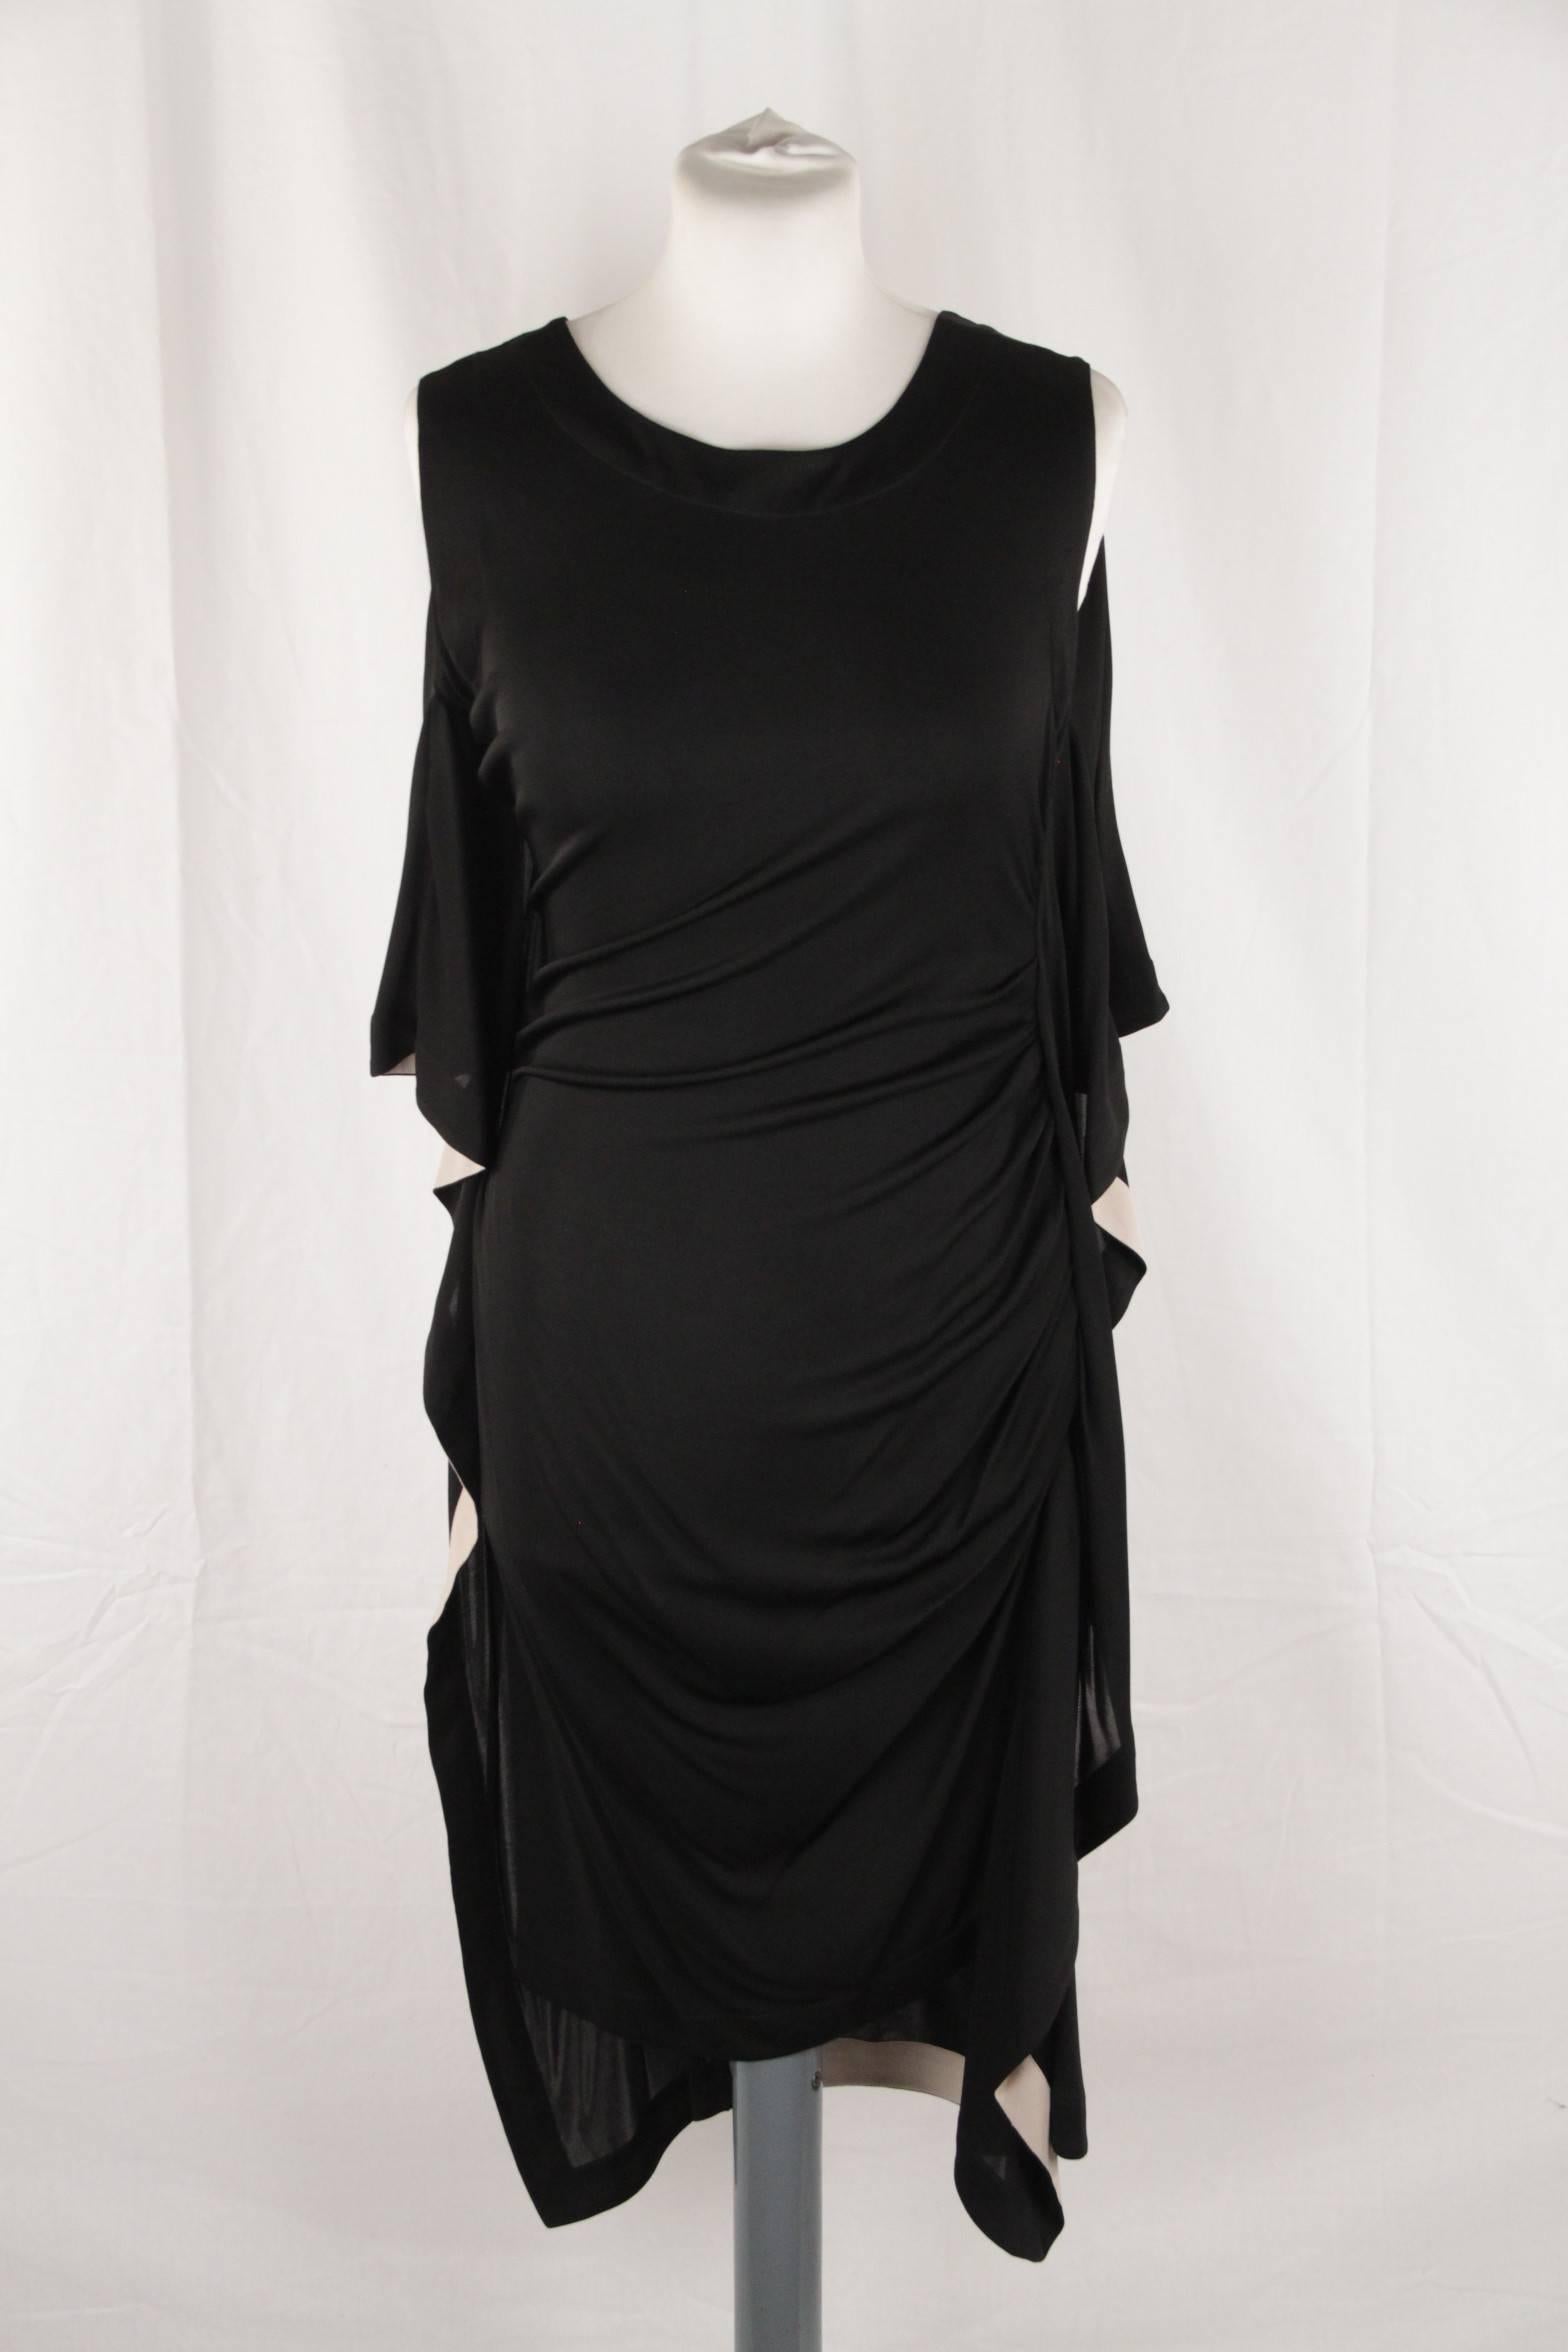 - Black silky sleeveless dress

- Round neck

- Sleeveless design

- Frilled side

- Draped detailing on the side

- Contrast trim

- Size is not indicated. Estimated size is a SMALL size

Brand: VIONNET Paris - Made in France

Logos